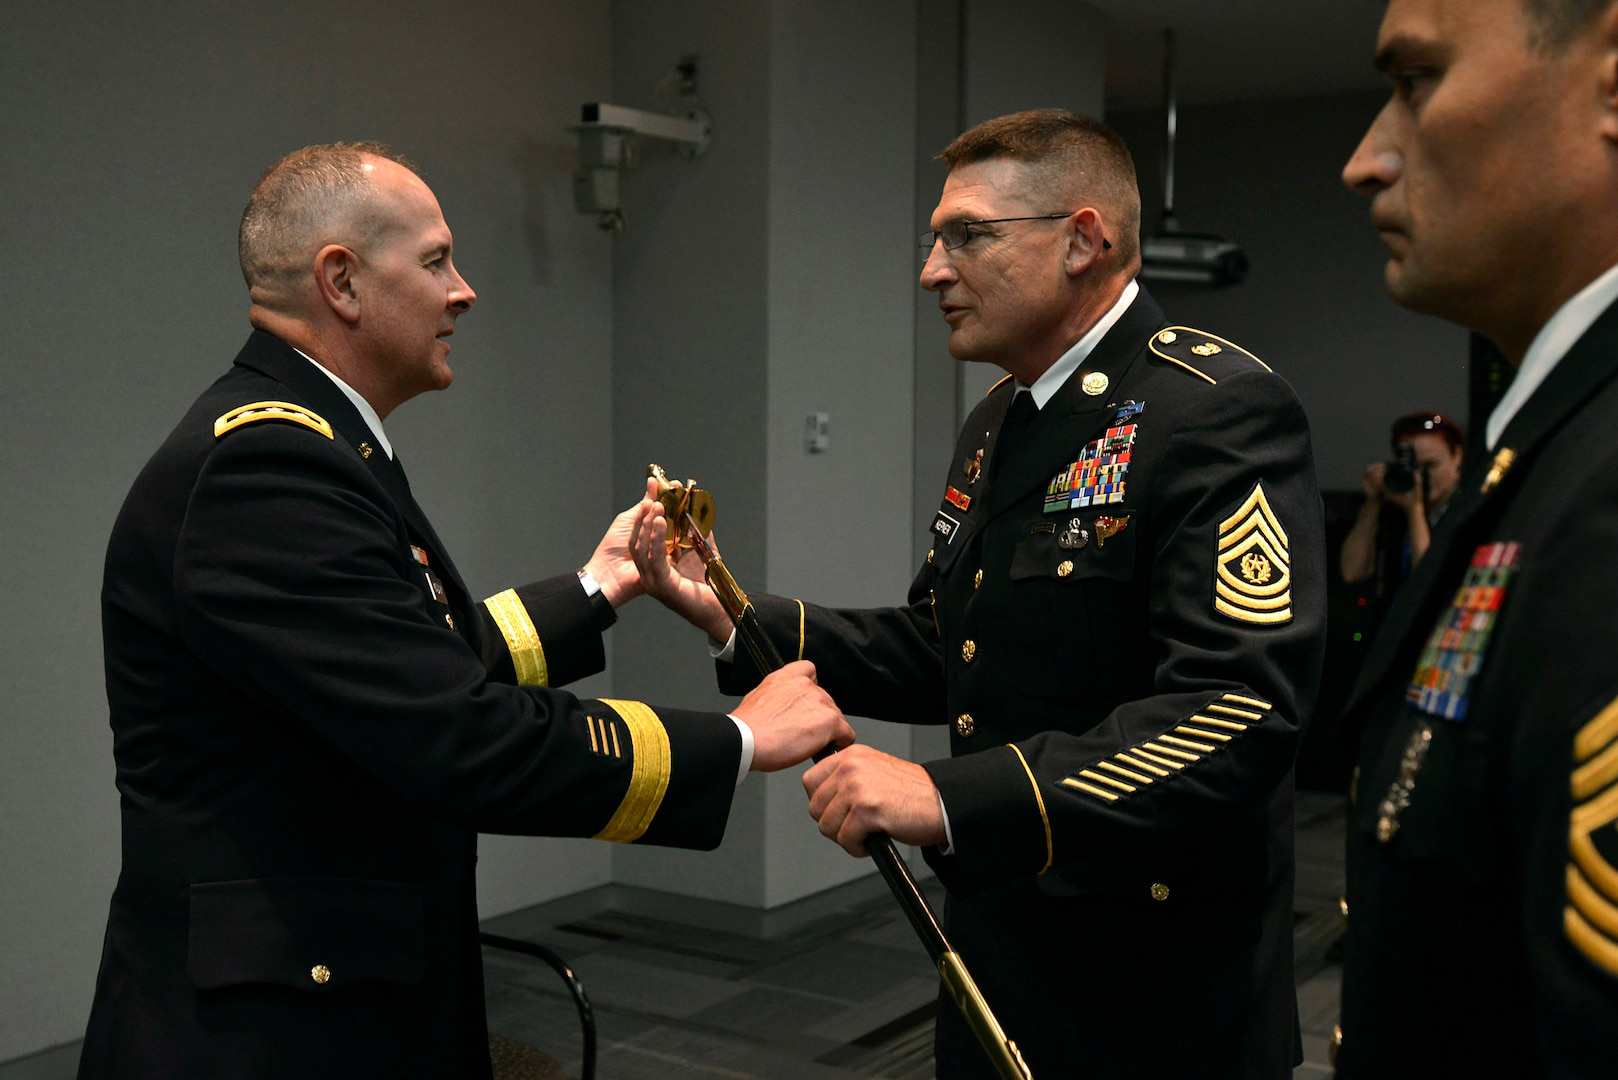 Army Lt. Gen. Timothy Kadavy, left, director of the Army Guard, passes the noncommissioned officer's sword to Command Sgt. Maj. Christopher Kepner, center, the incoming command sergeant major of the Army National Guard, during a Change of Responsibility Ceremony, June 8, 2016 in Arlington, Va. The passing of the NCO sword is a symbolic representation of the assumption of responsibilty. 